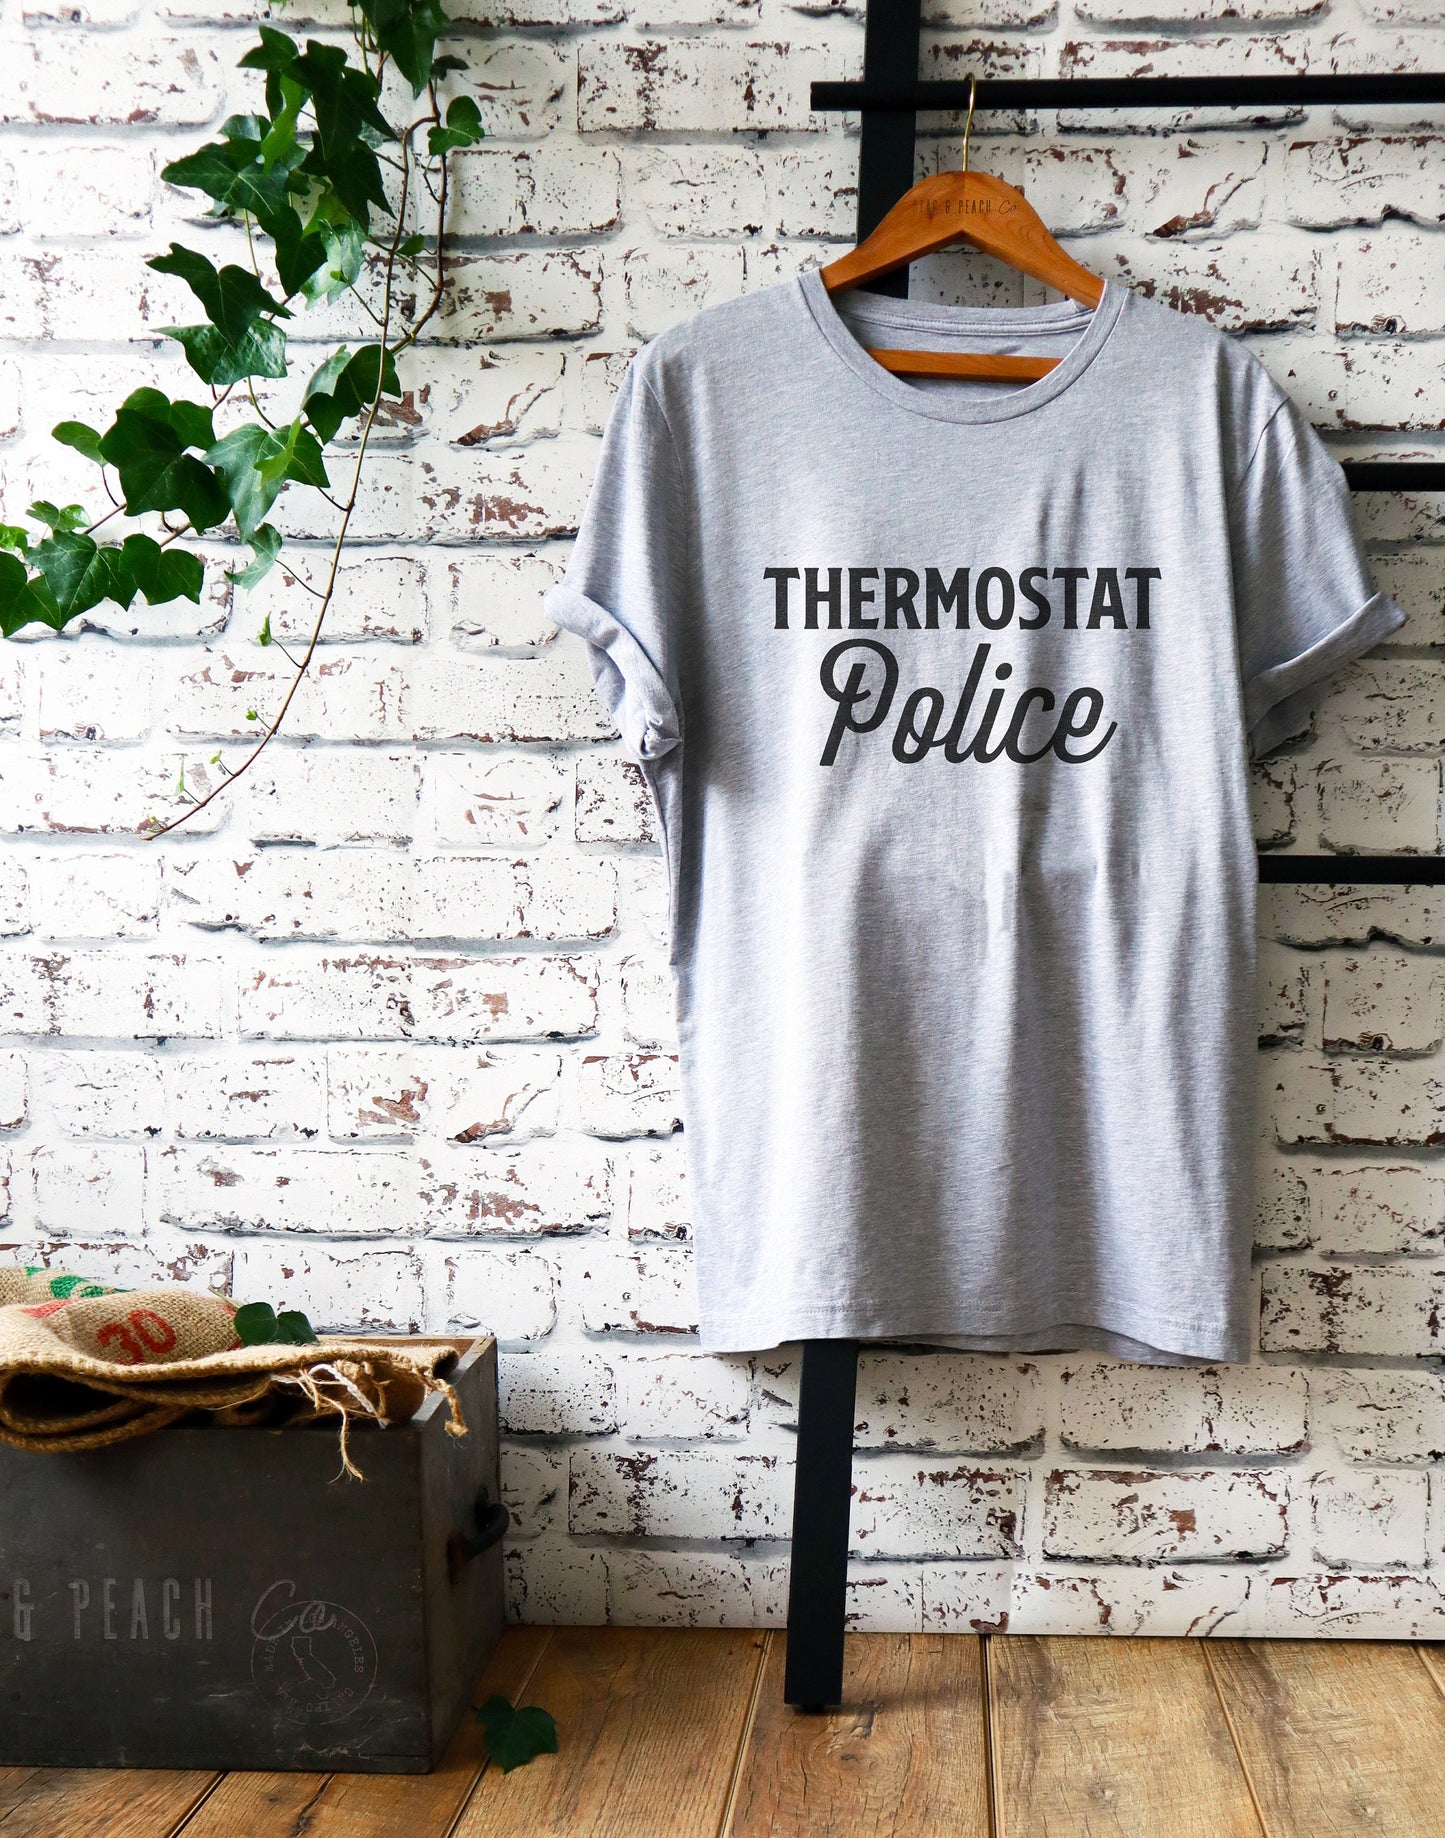 Thermostat Police Shirt/Tank Top/Hoodie - Dad Shirt, Dad Gift, Funny Dad Shirt, Fathers Day Gift, Funny Dad Gifts, Grandpa Shirt, Papa Shirt